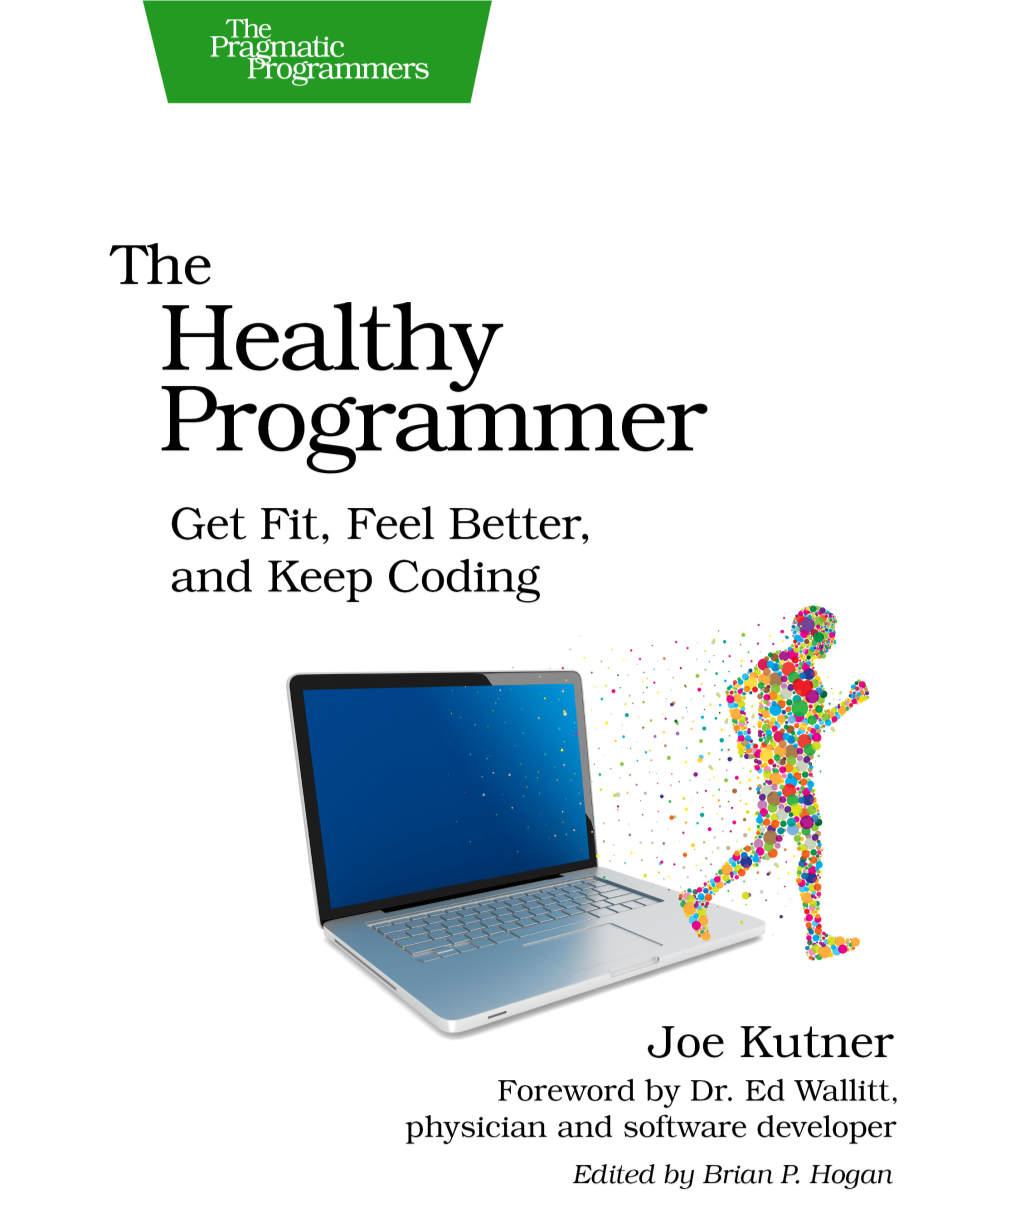 The Healthy Programmer - Get Fit